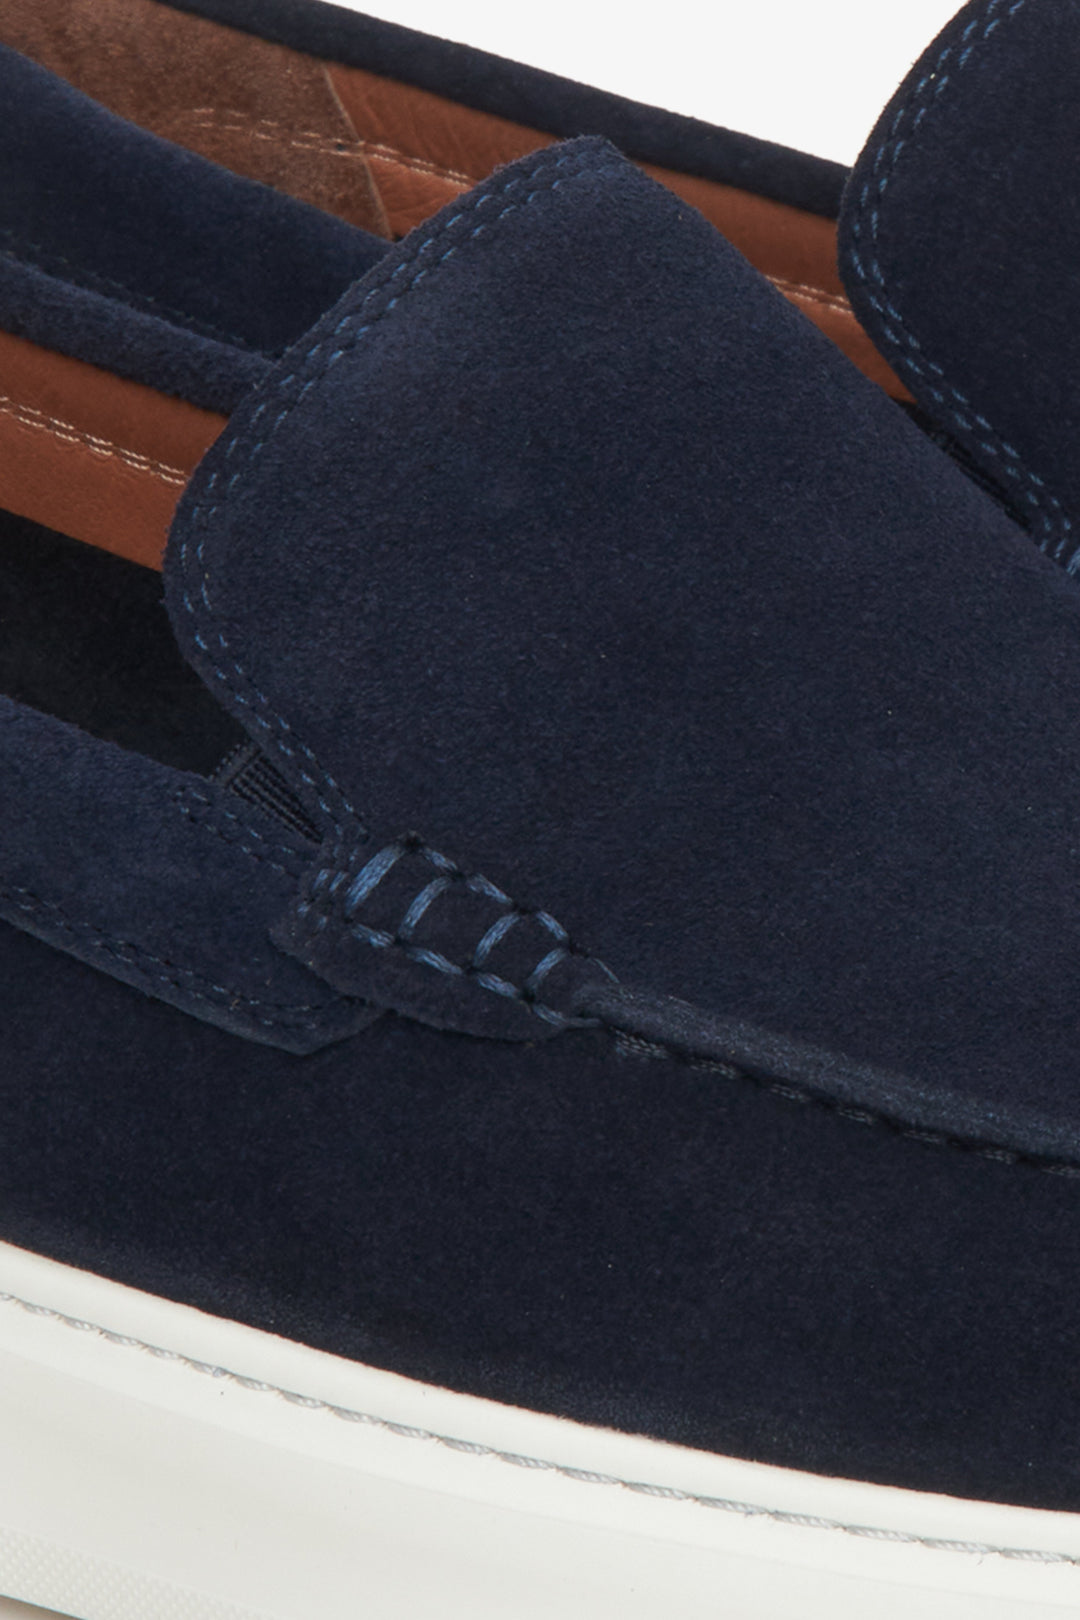 Navy blue men's velour loafers - close-up on the stitching detail.